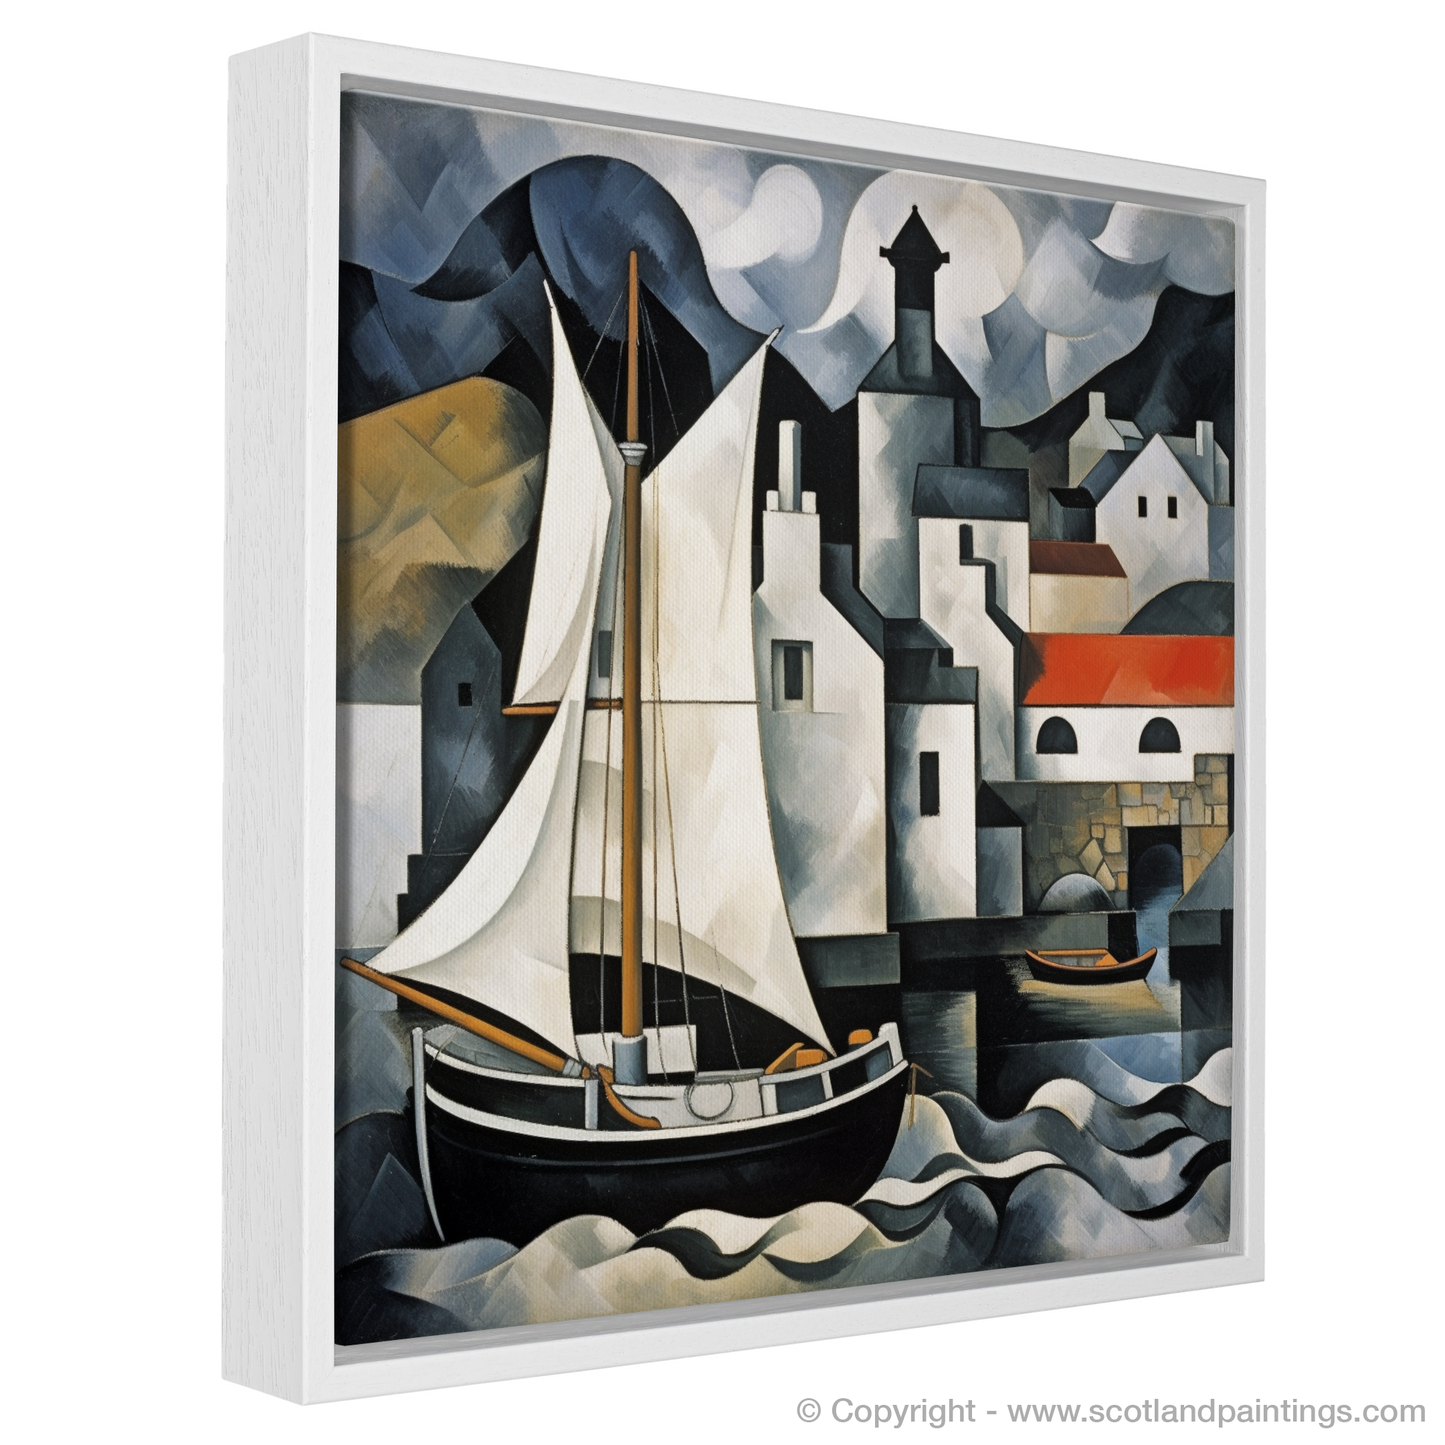 Cubist Voyage at Portree Harbour